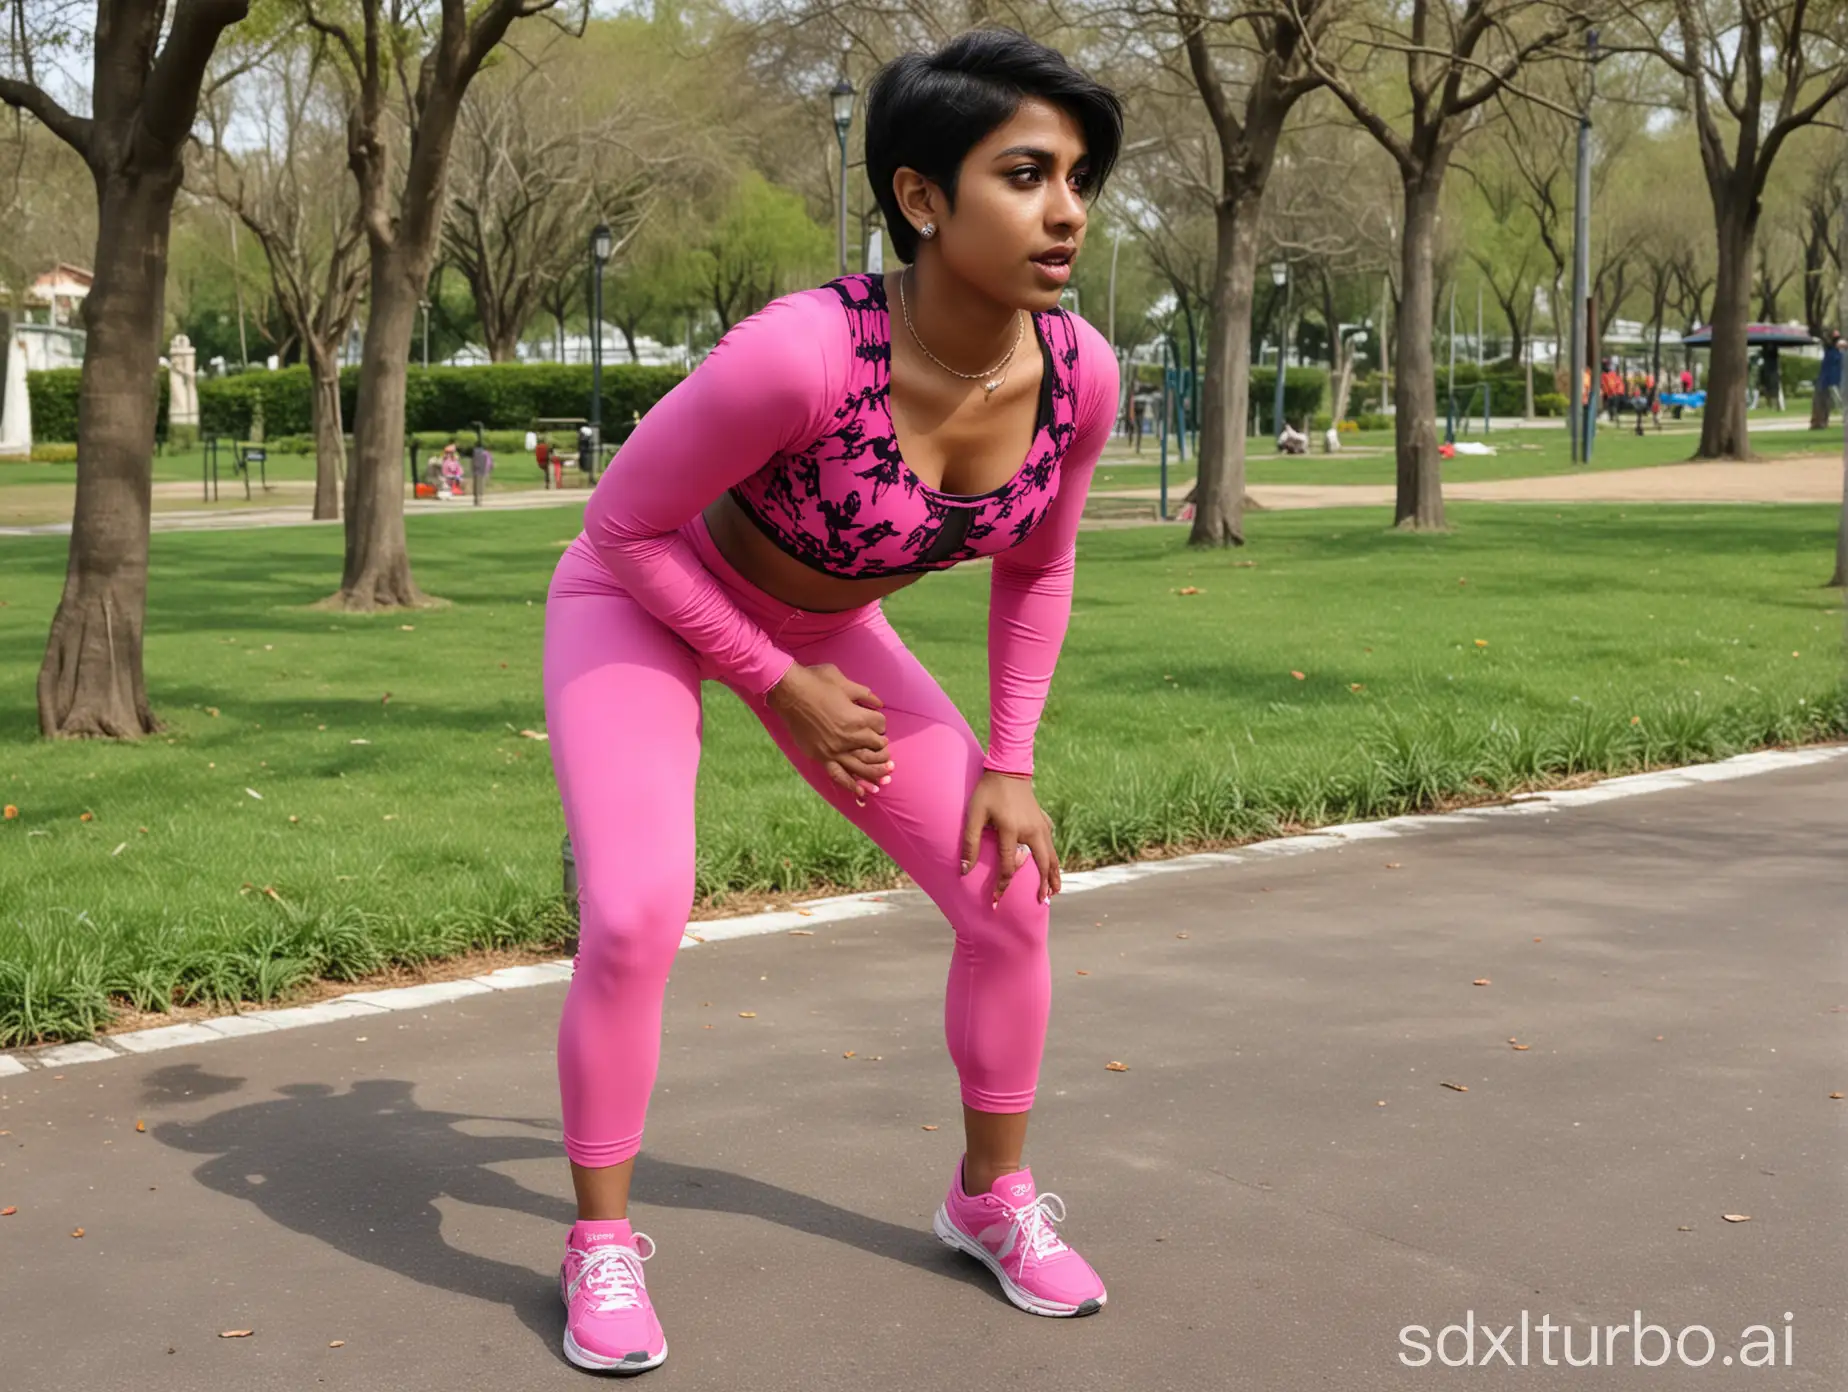 Femboy-Cross-Dresser-in-Pink-Outfit-Doing-Squats-at-Crowded-Public-Park